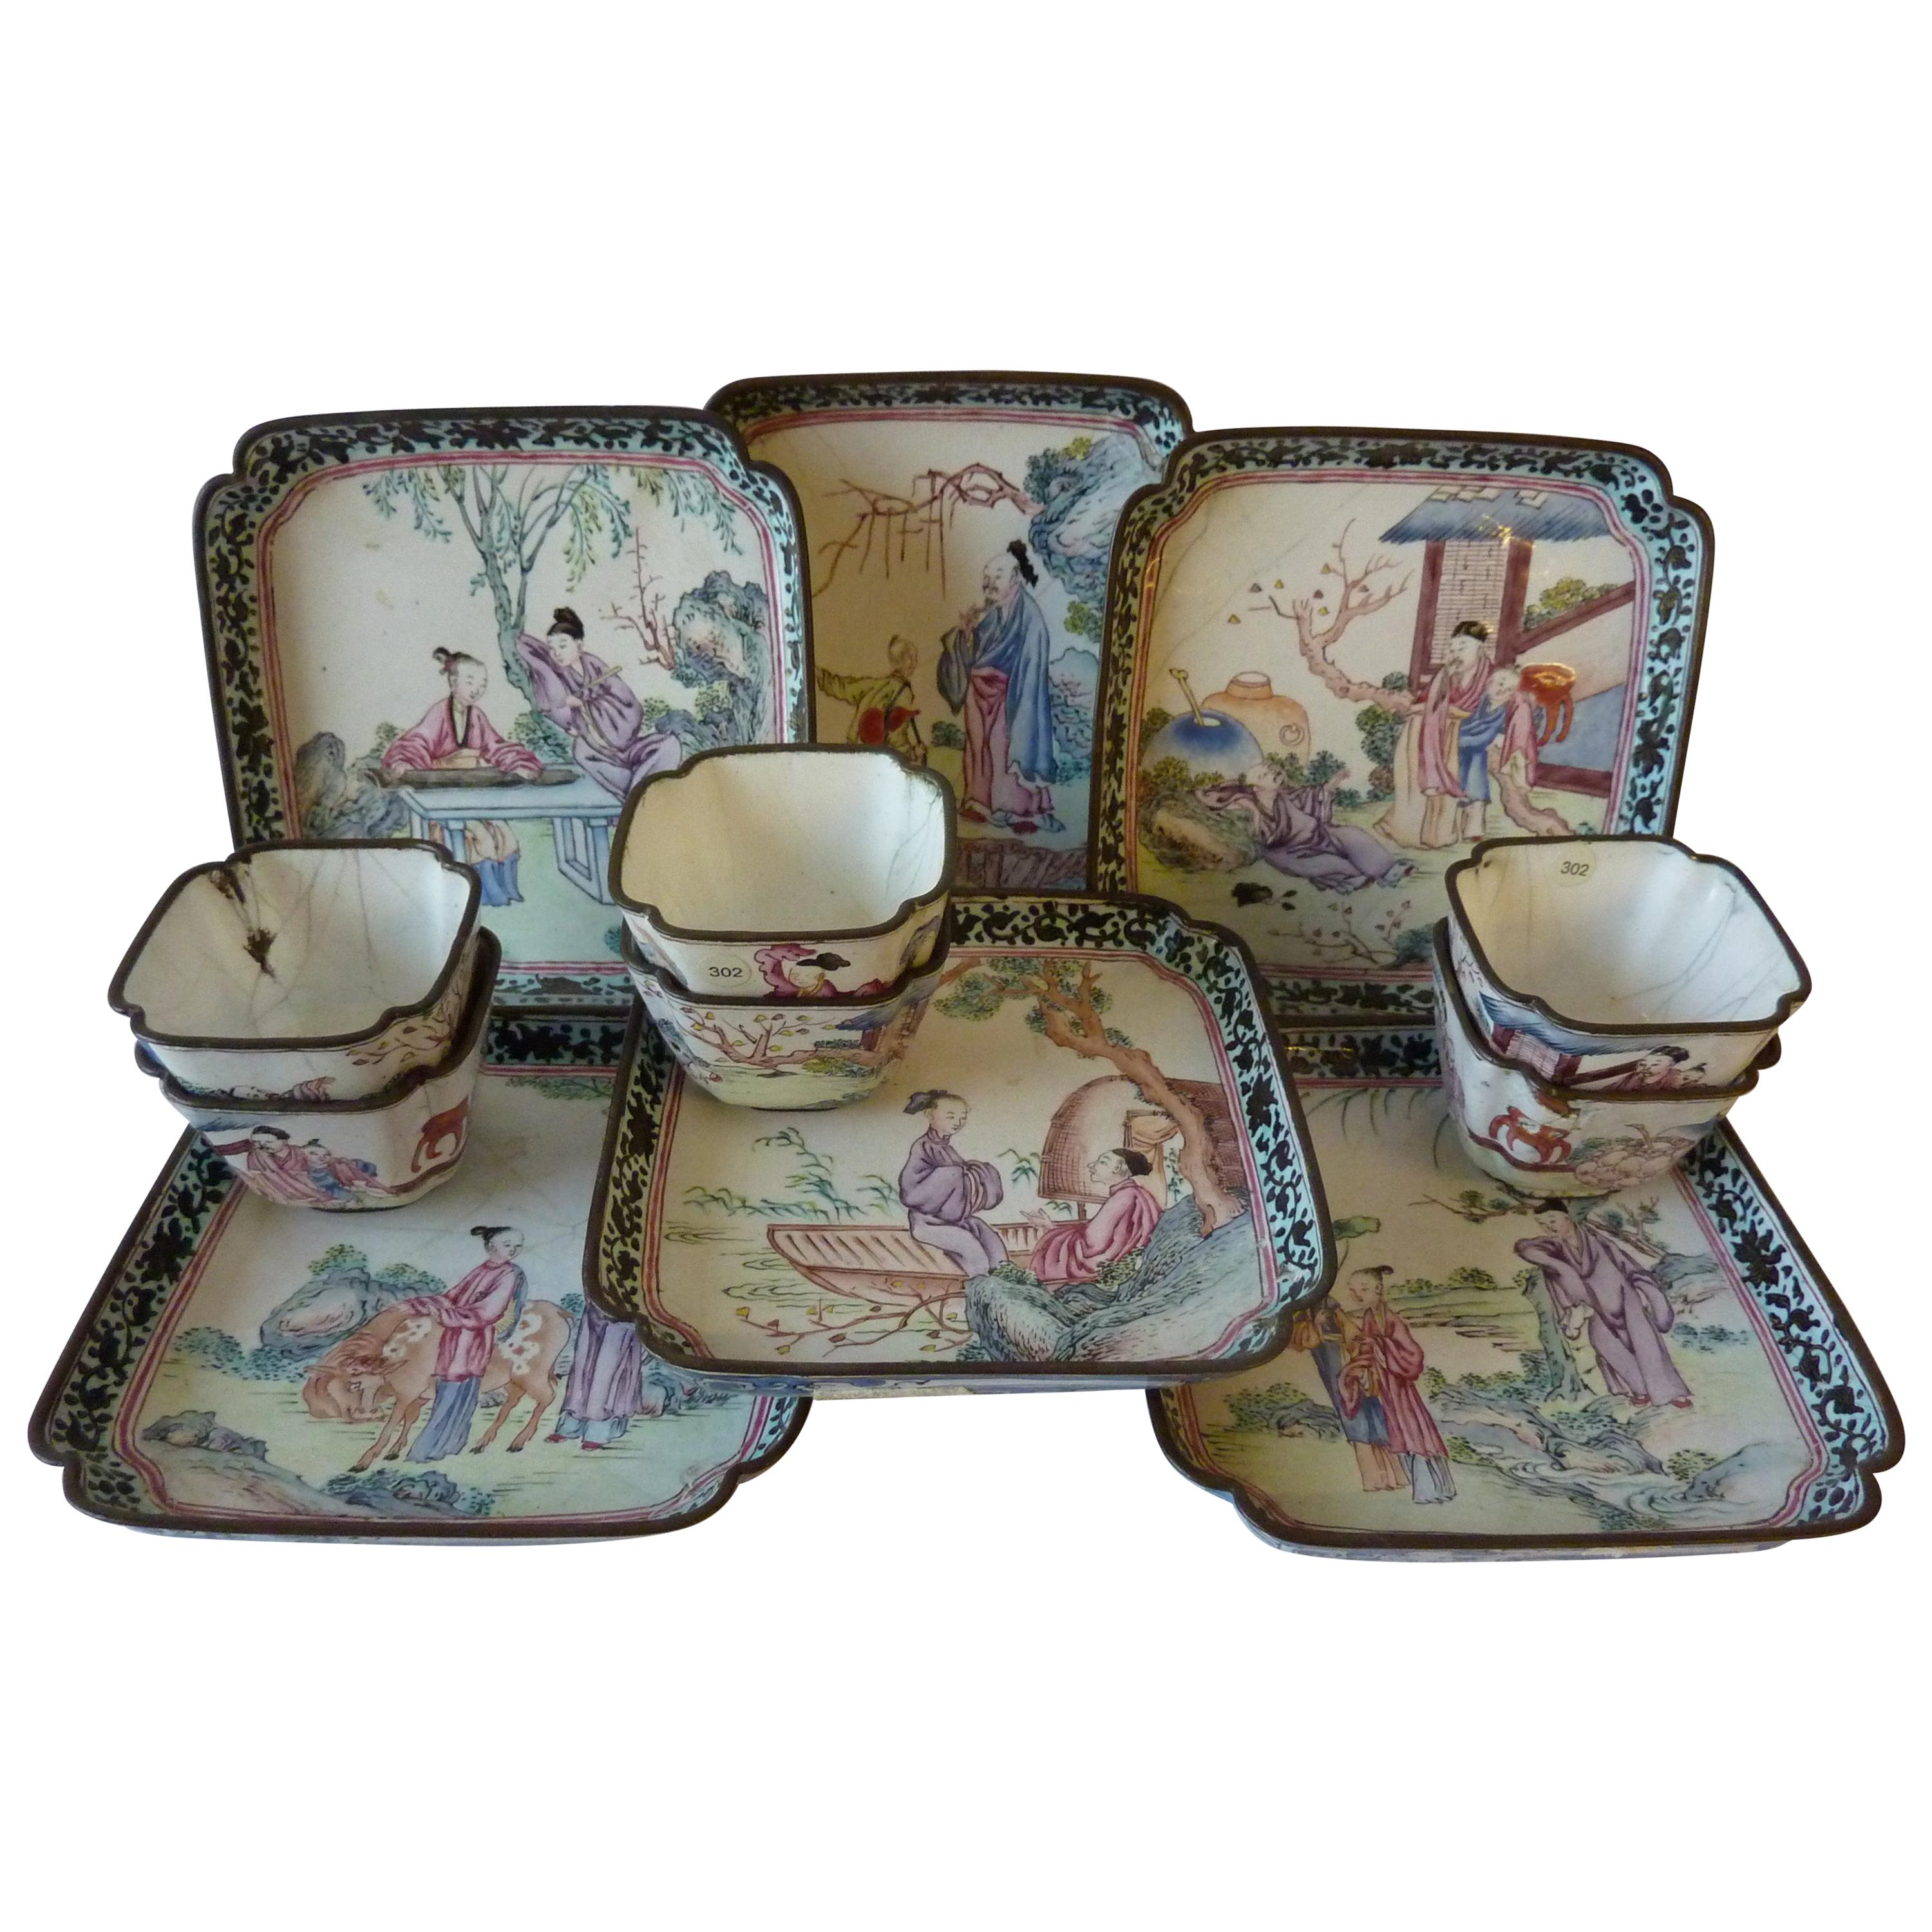 Six Canton Enamel Cup and Saucers